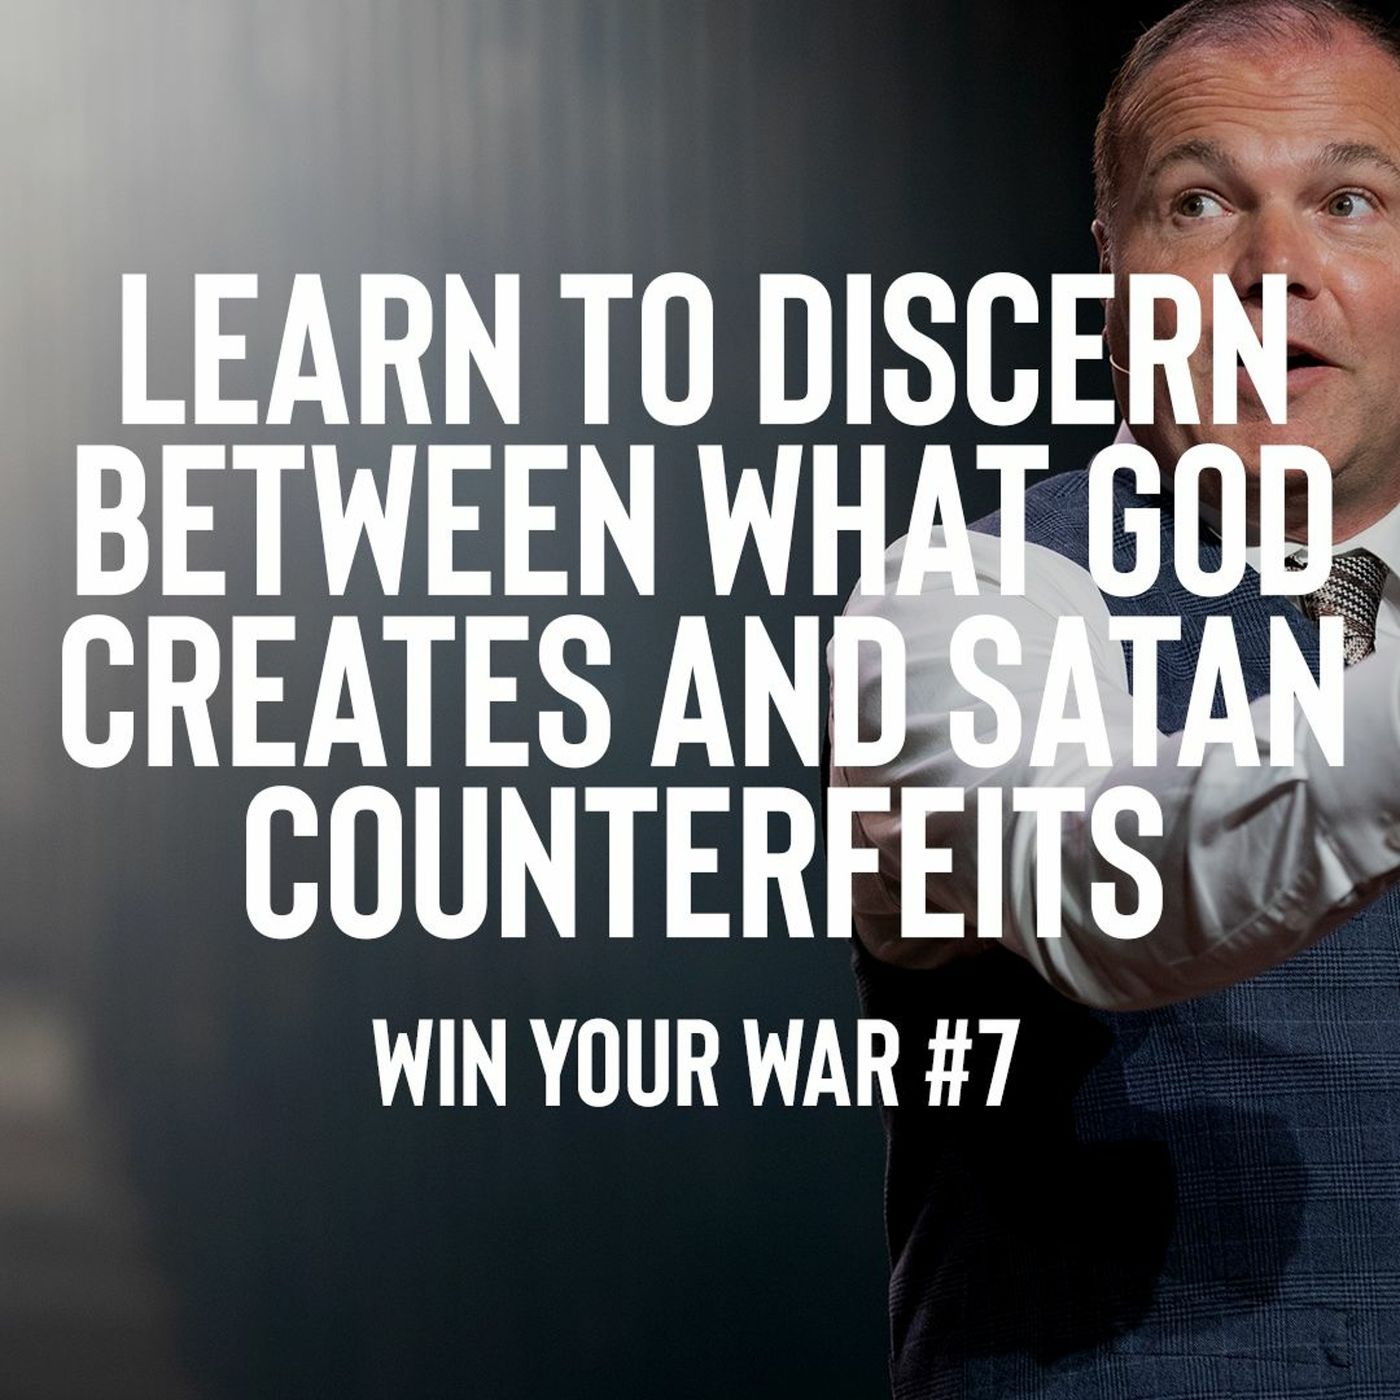 Win Your War #7 - Learn to Discern Between what God Creates and Satan Counterfeits